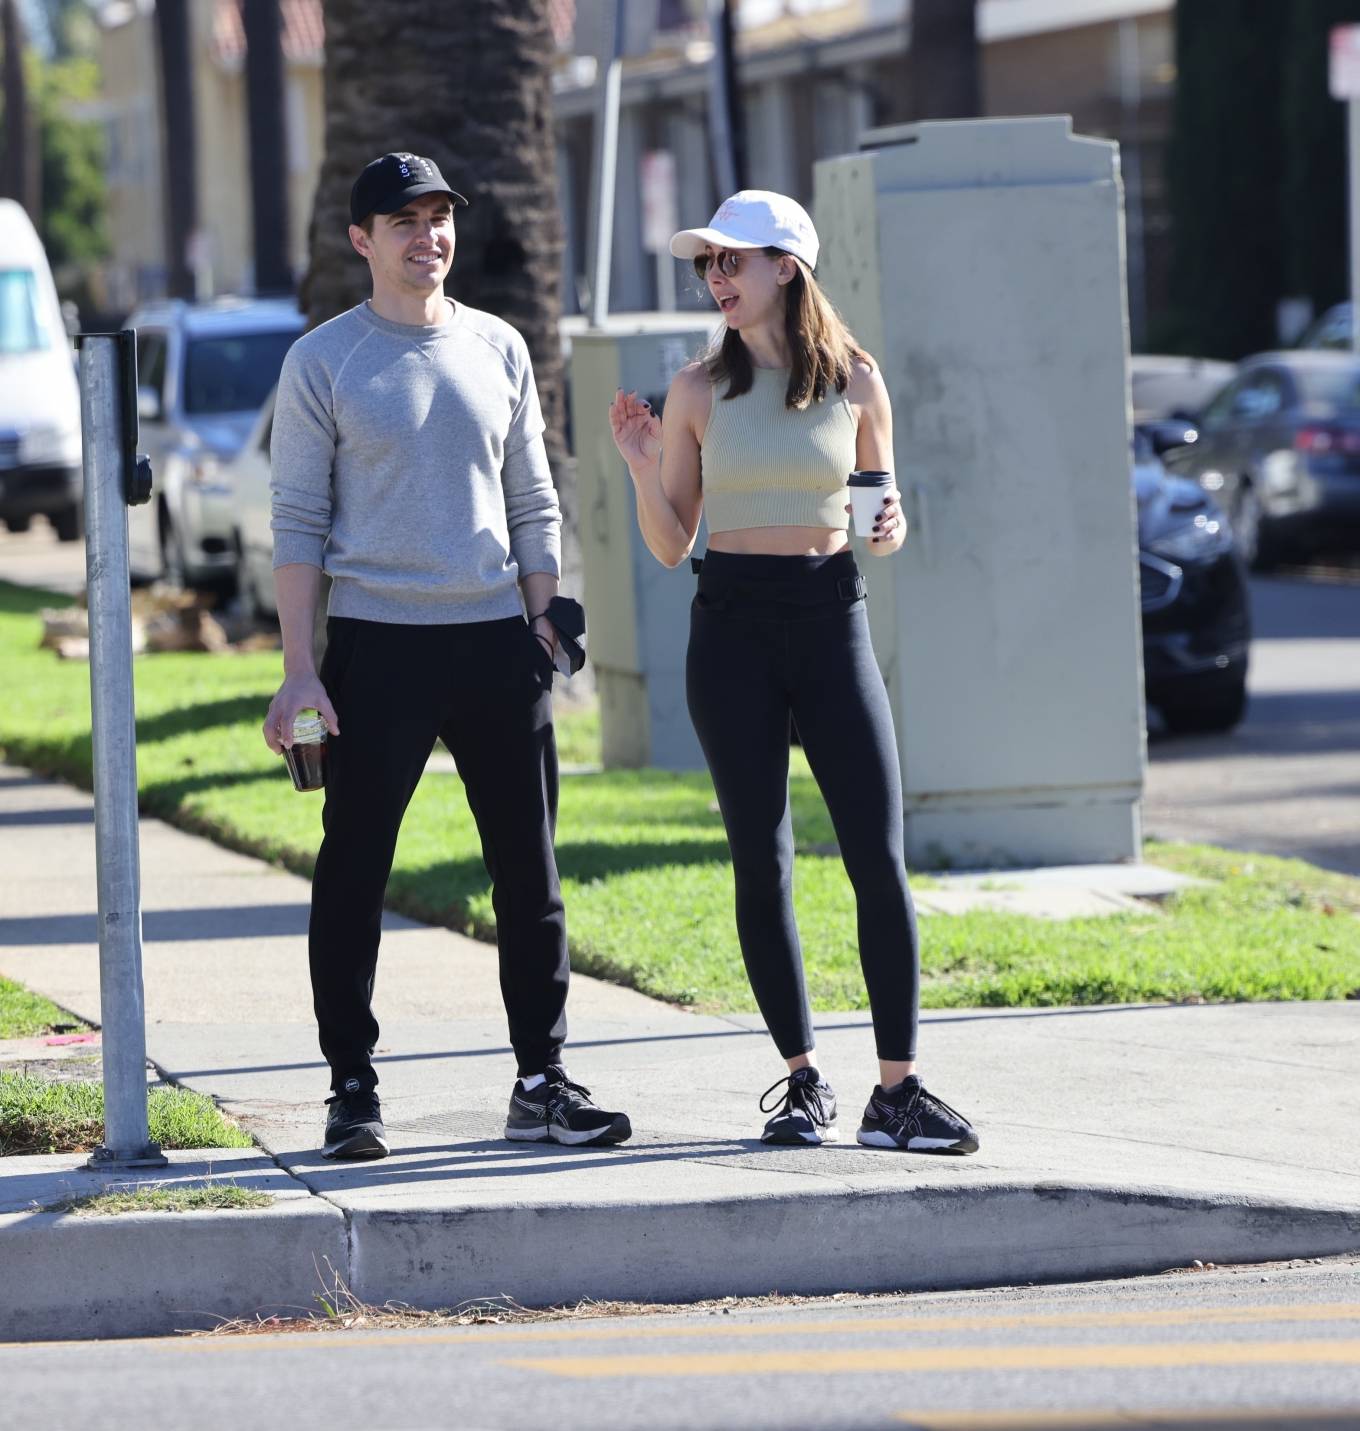 Alison Brie 2021 : Alison Brie – With Dave Franco in athleisure out in Los Angeles-04